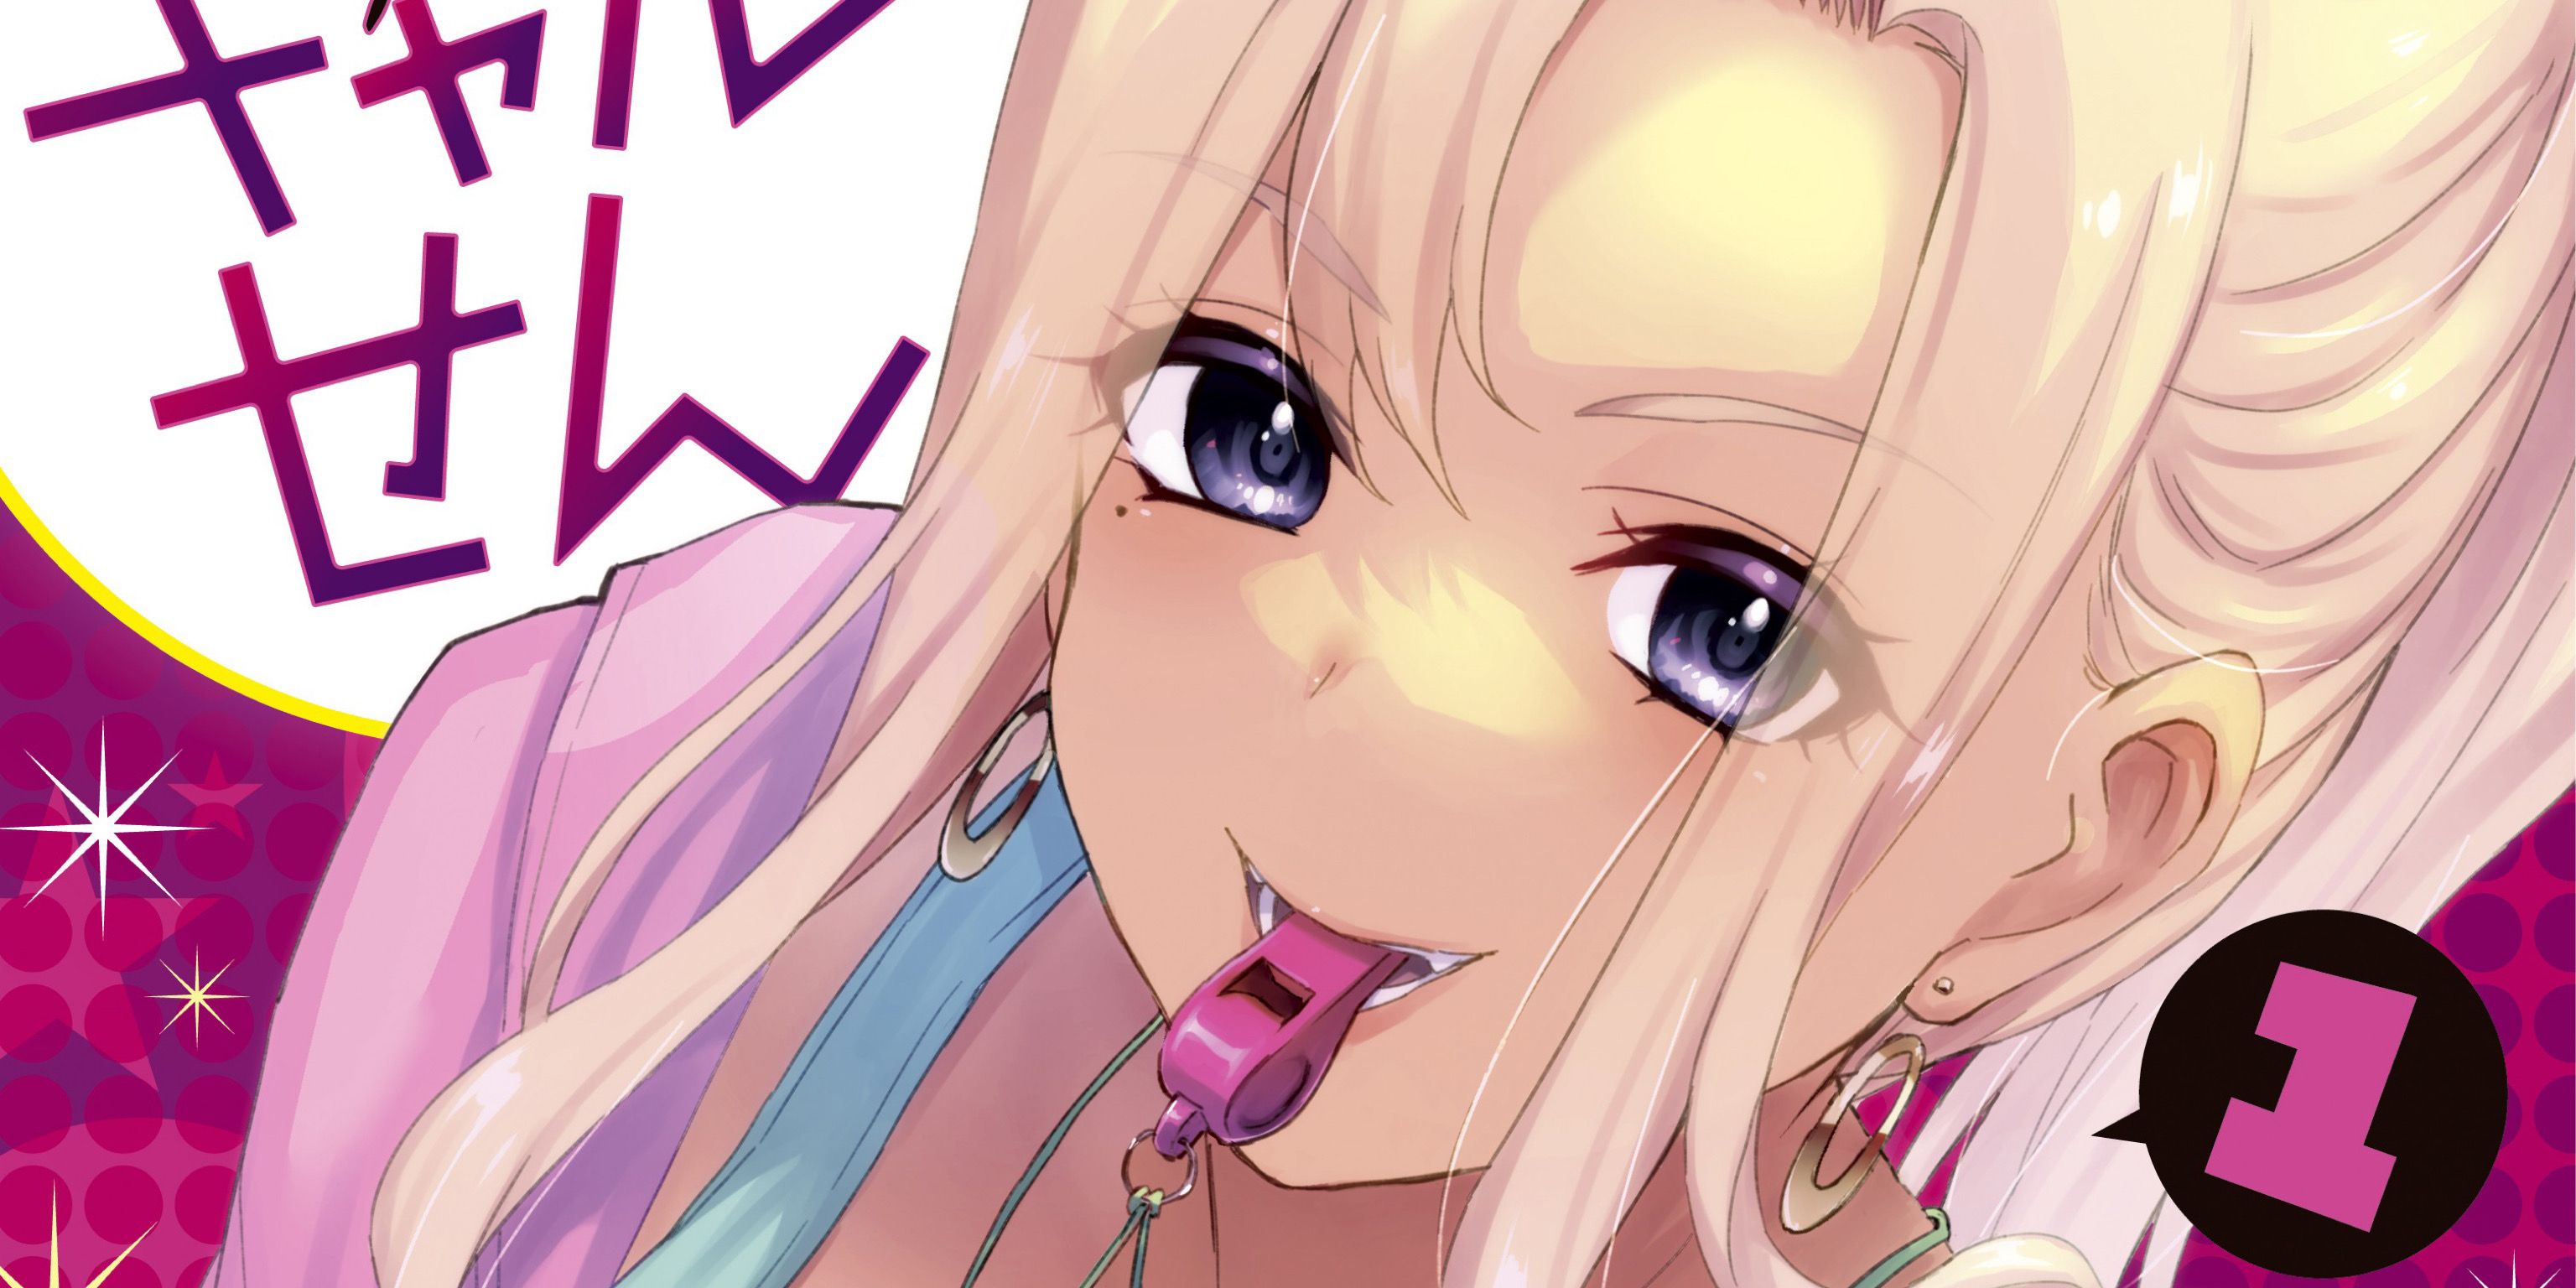 Suzune on the cover of Volume 1 of Gyaru-Sensei, blowing a whistle.